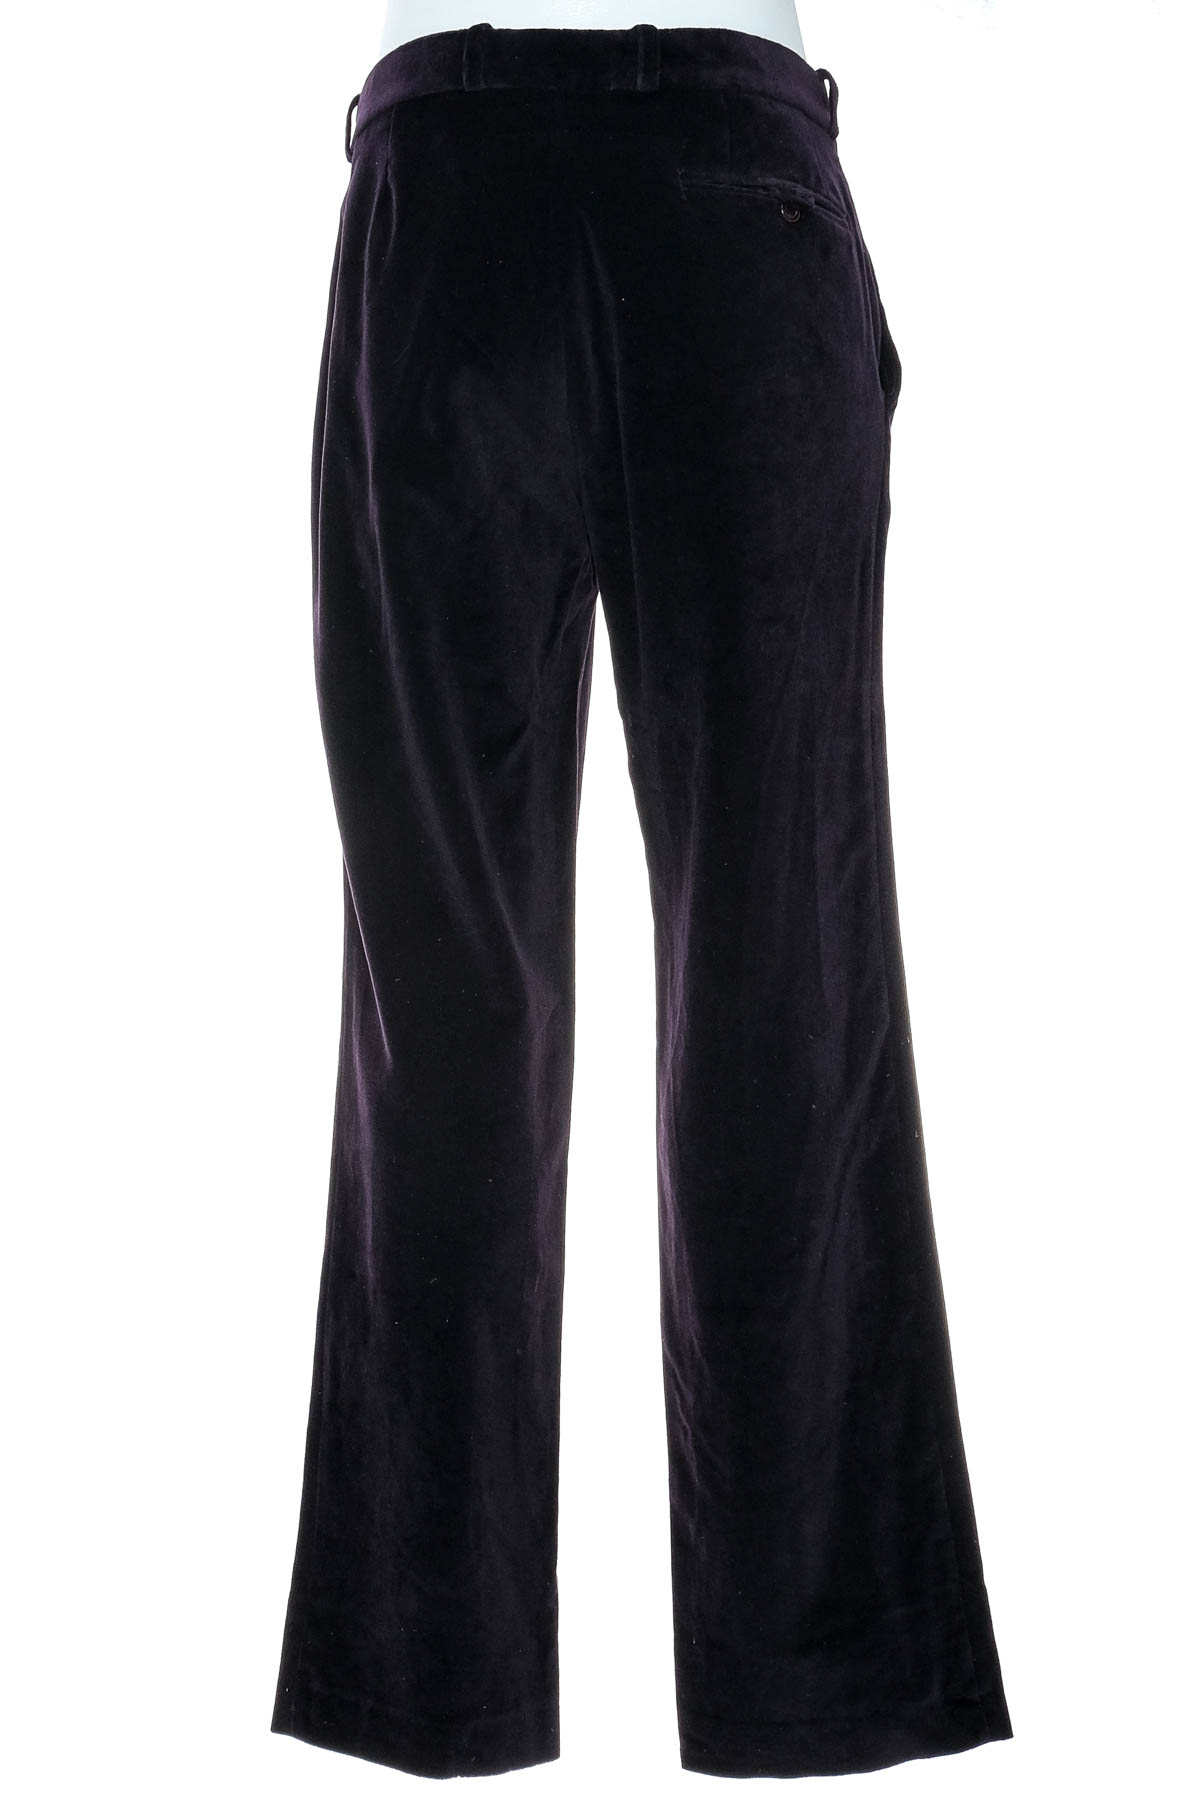 Men's trousers - Conwell - 1